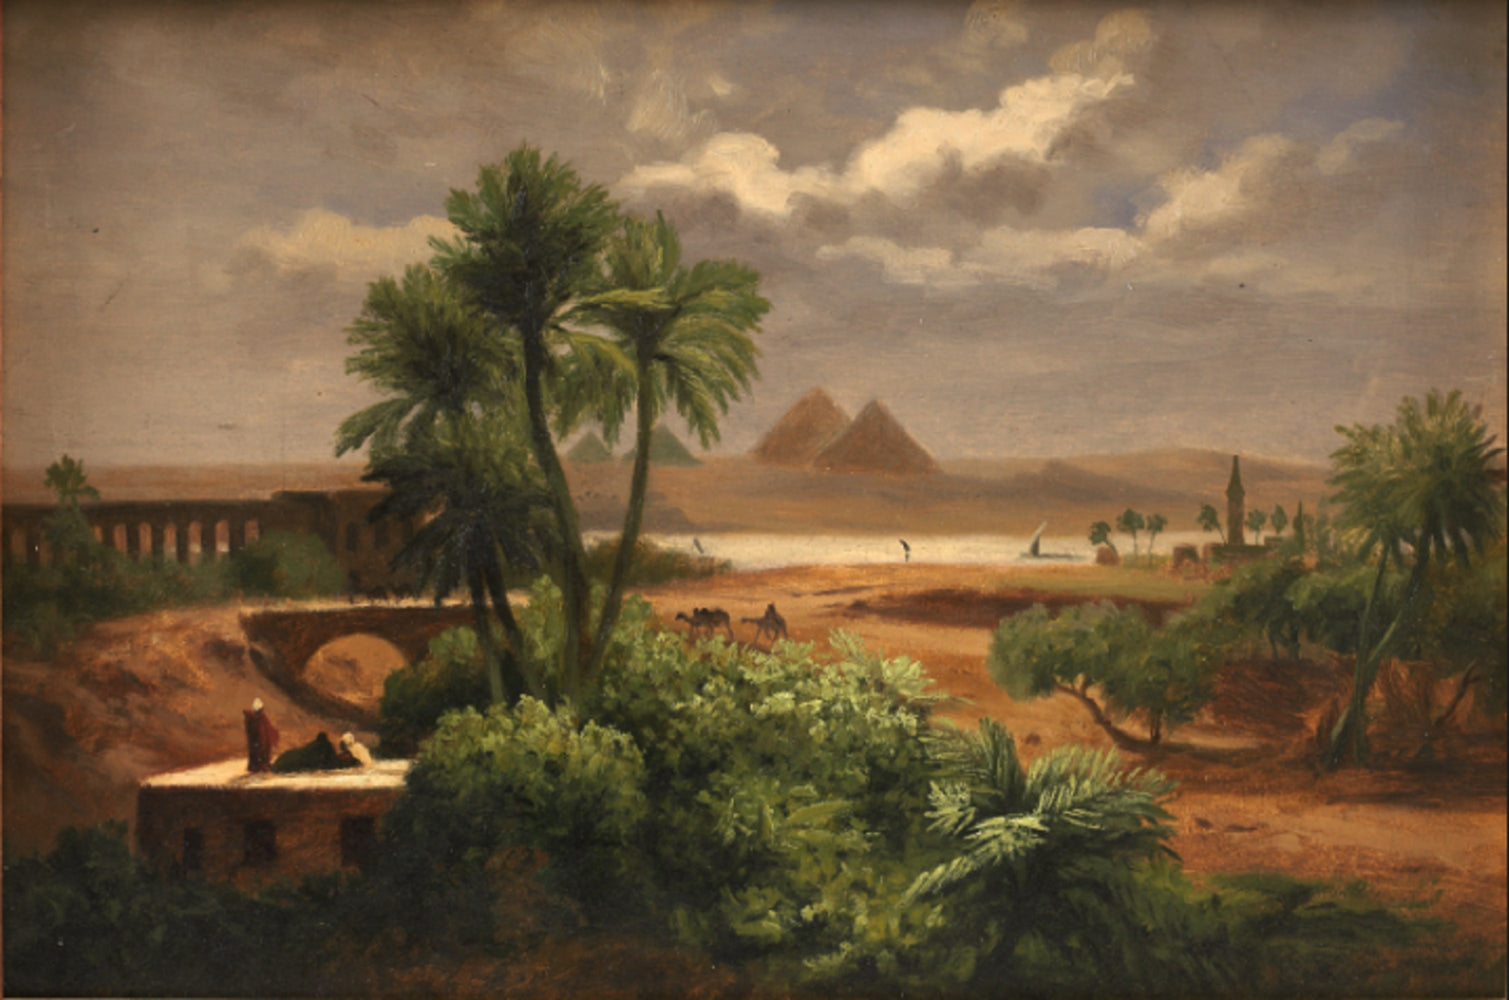 'Jerusalem, a storm approaching; and The Nile at Giza' by Eduard Hartung